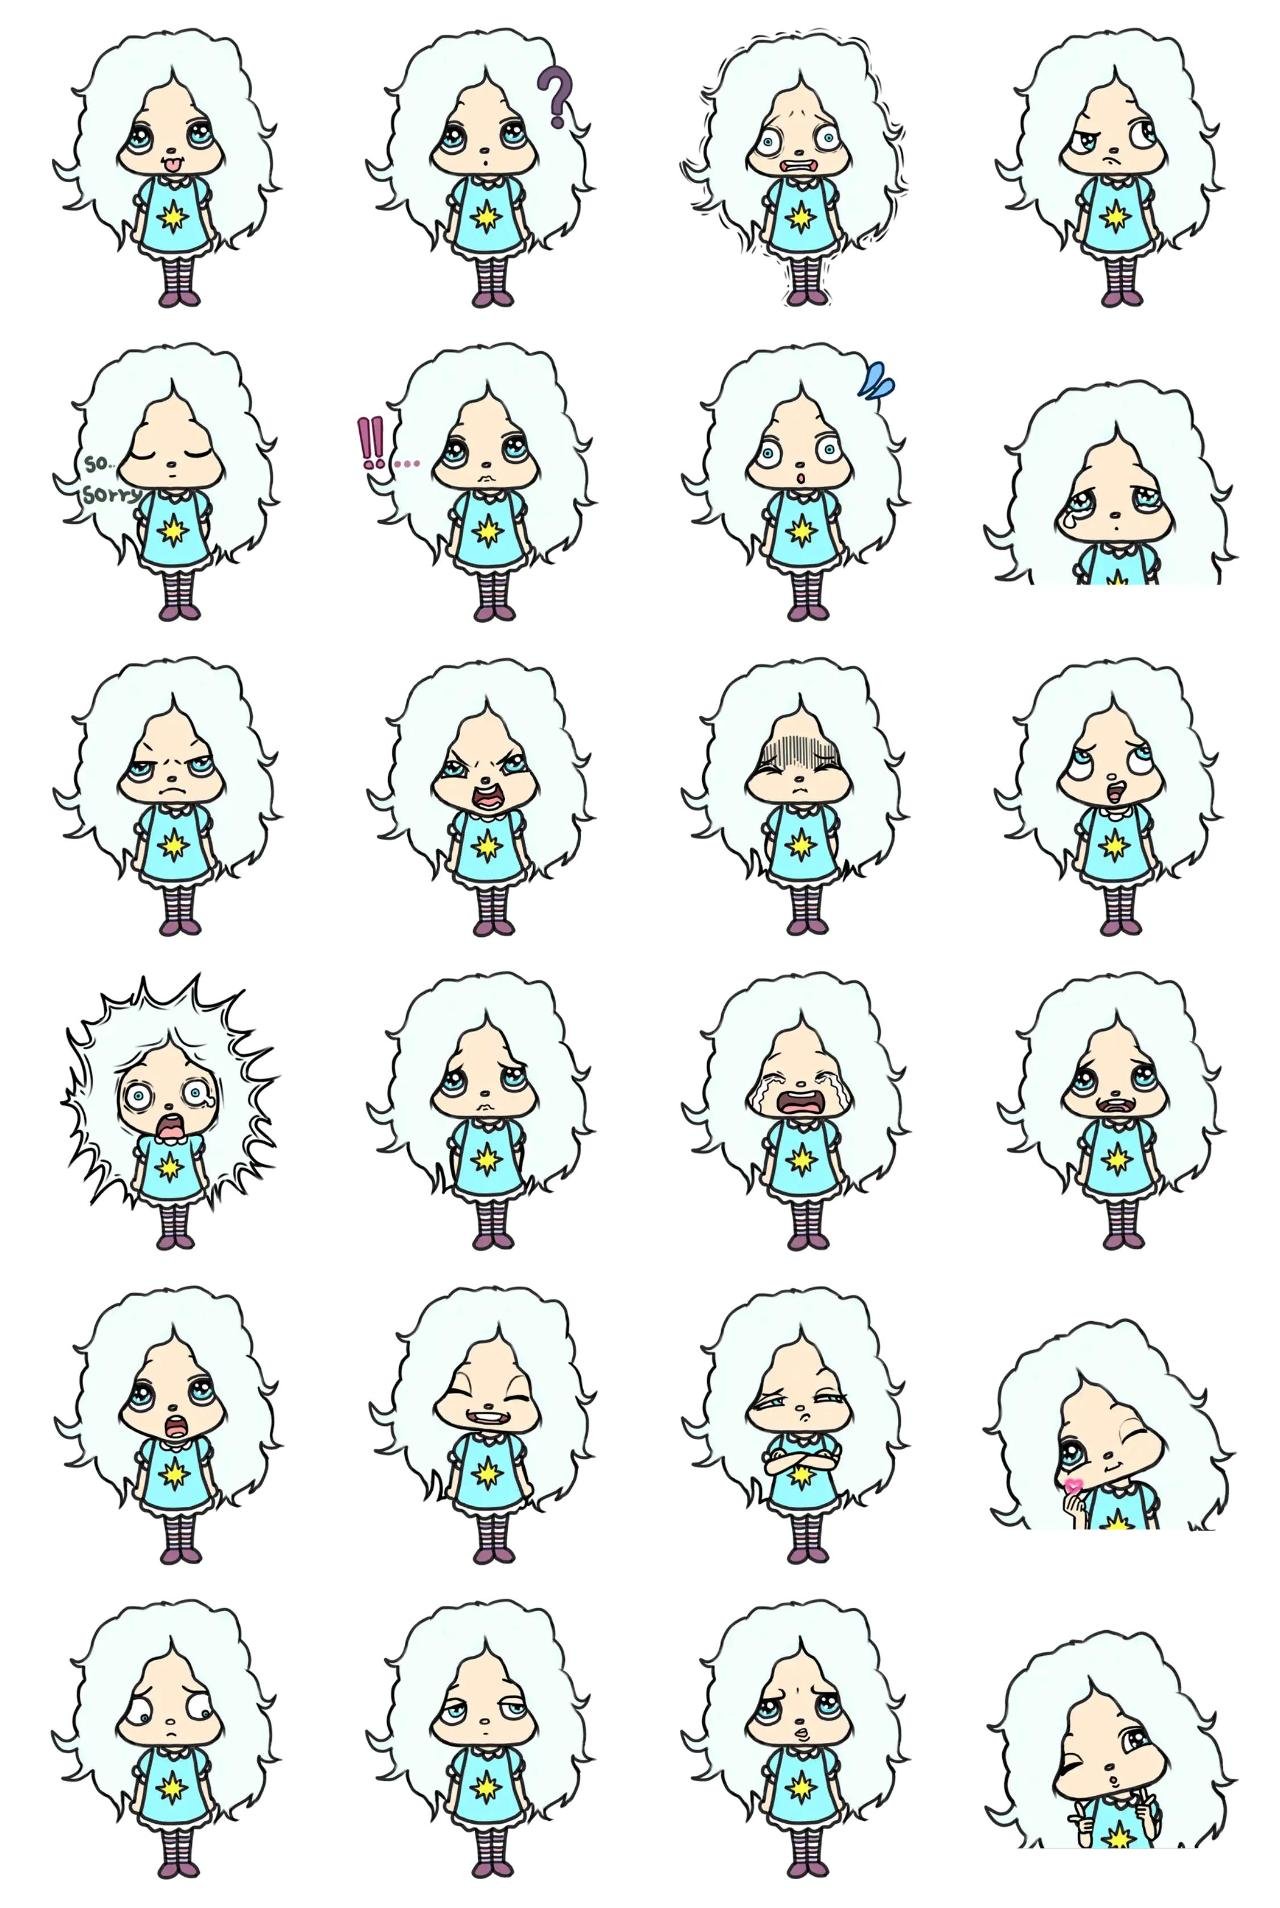 A mysterious child Rini People sticker pack for Whatsapp, Telegram, Signal, and others chatting and message apps